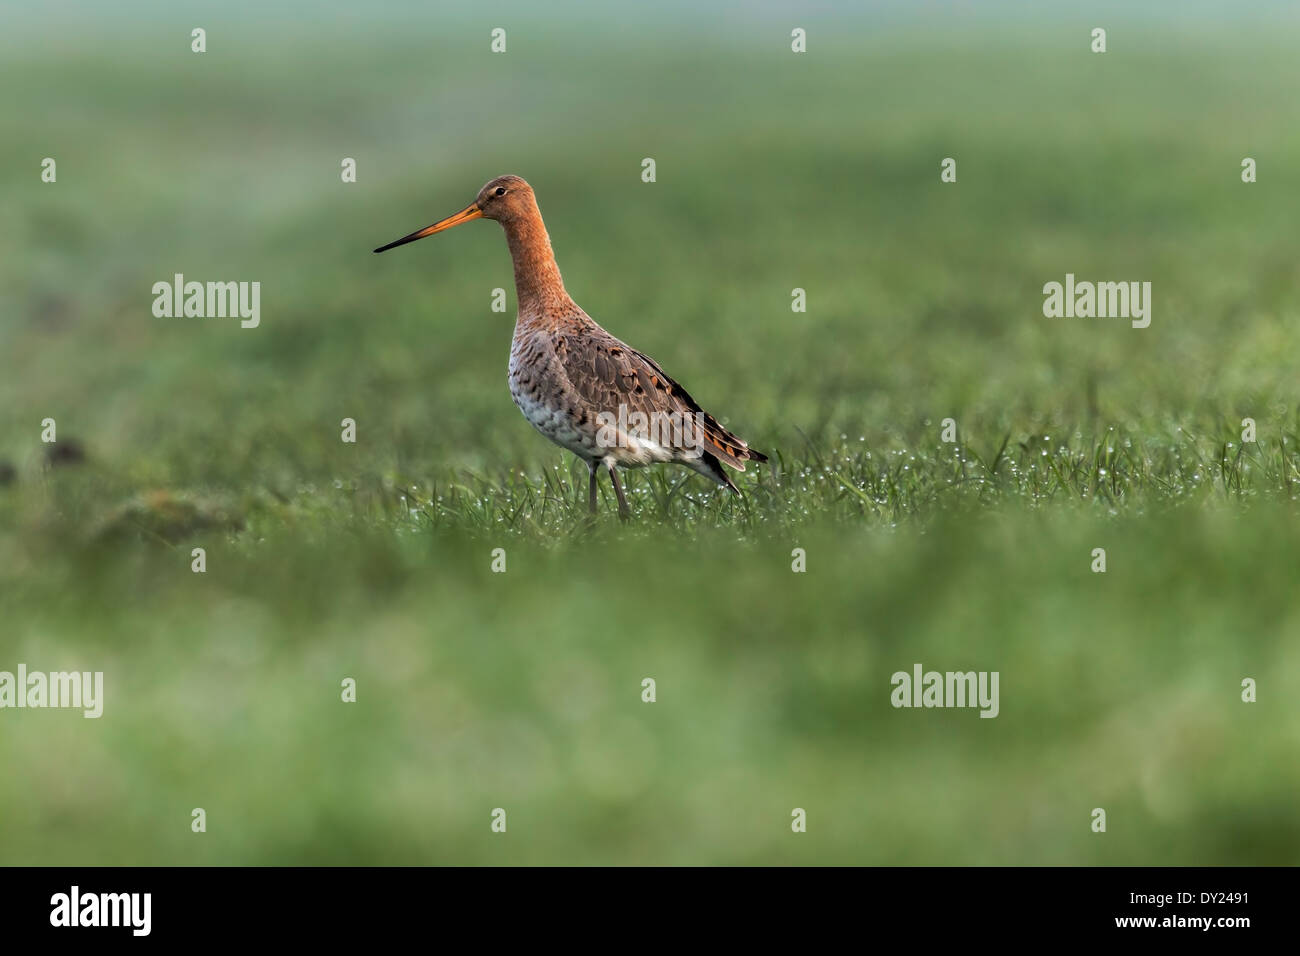 Black-tailed godwit foraging on a field near a dutch farm. A low point of view at eye level. Stock Photo